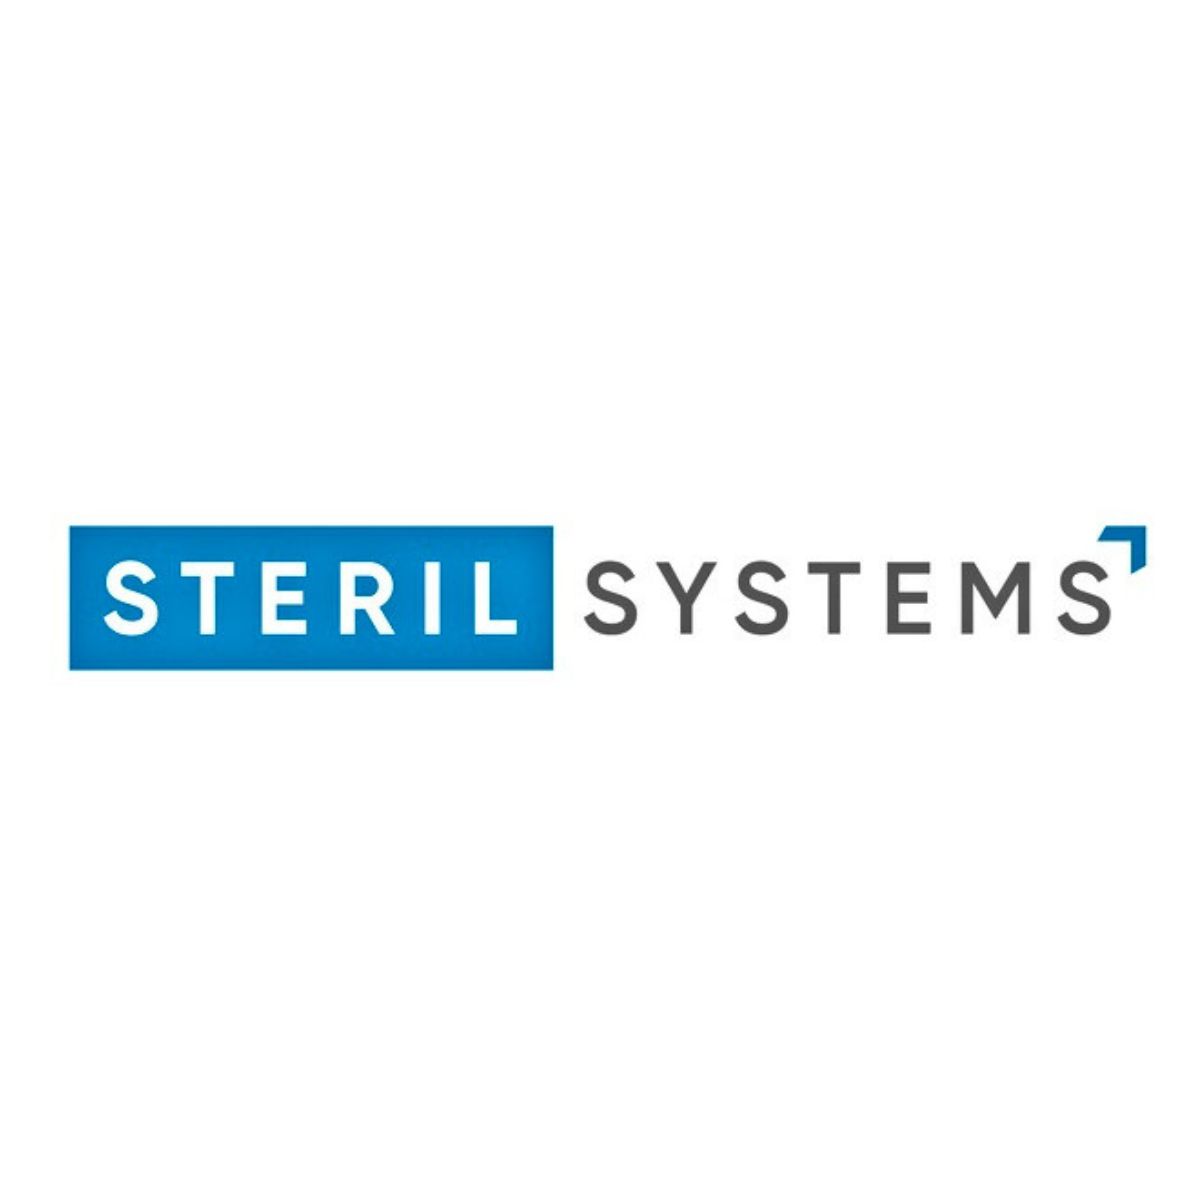 STERIL SYSTEMS